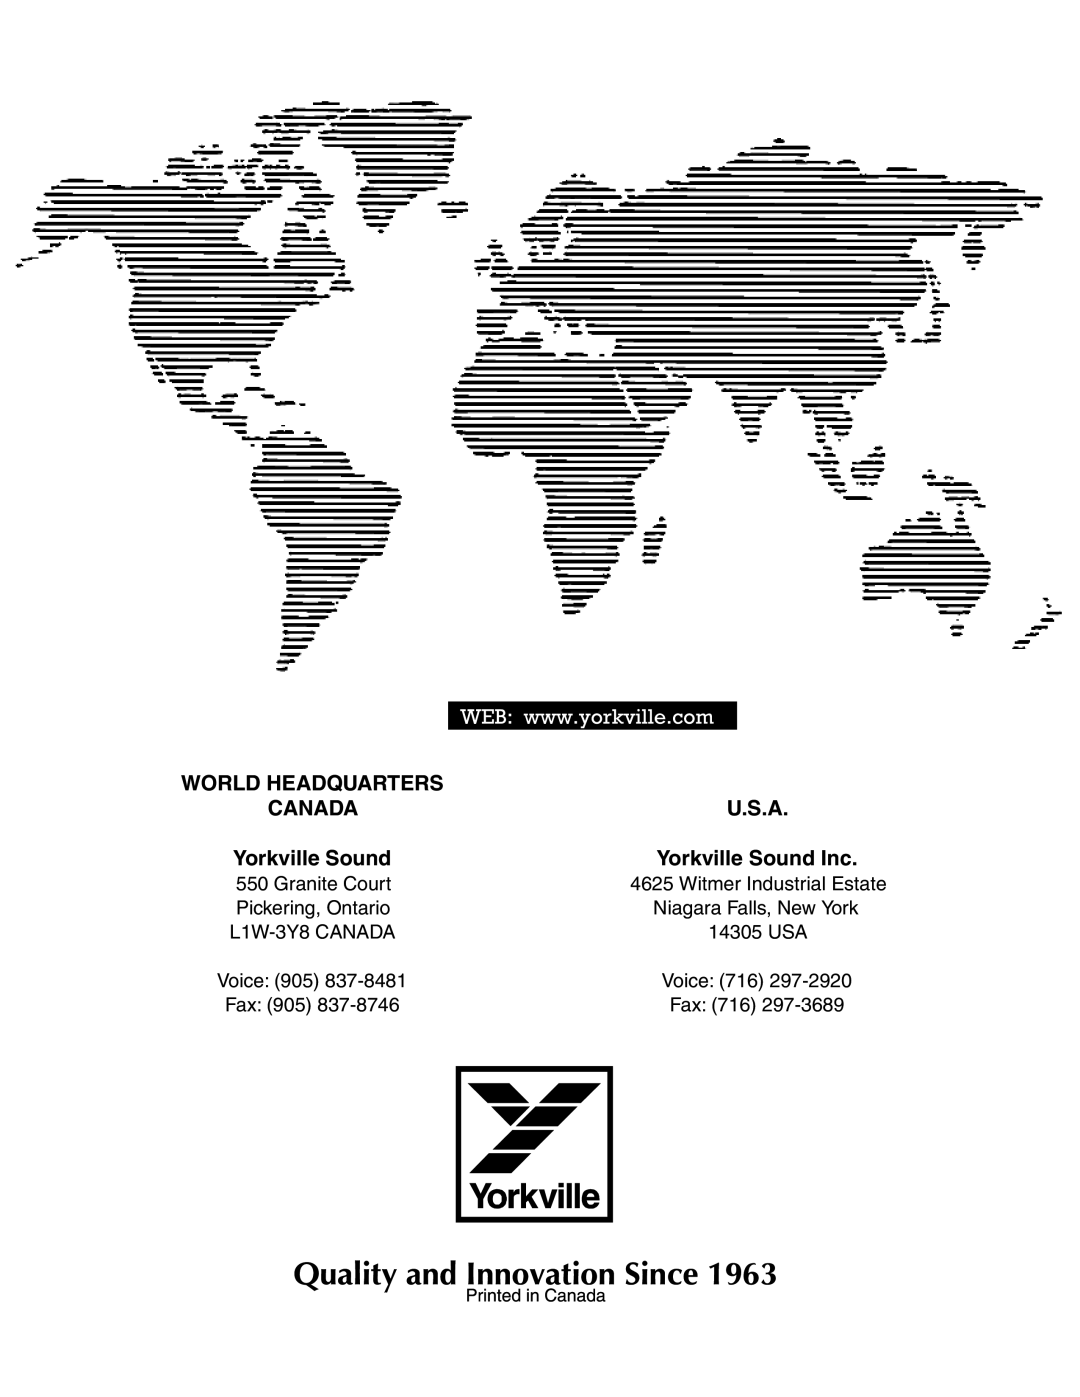 Yorkville Sound YS1068 owner manual Canada, U.S.A, Yorkville Sound Inc, World Headquarters 